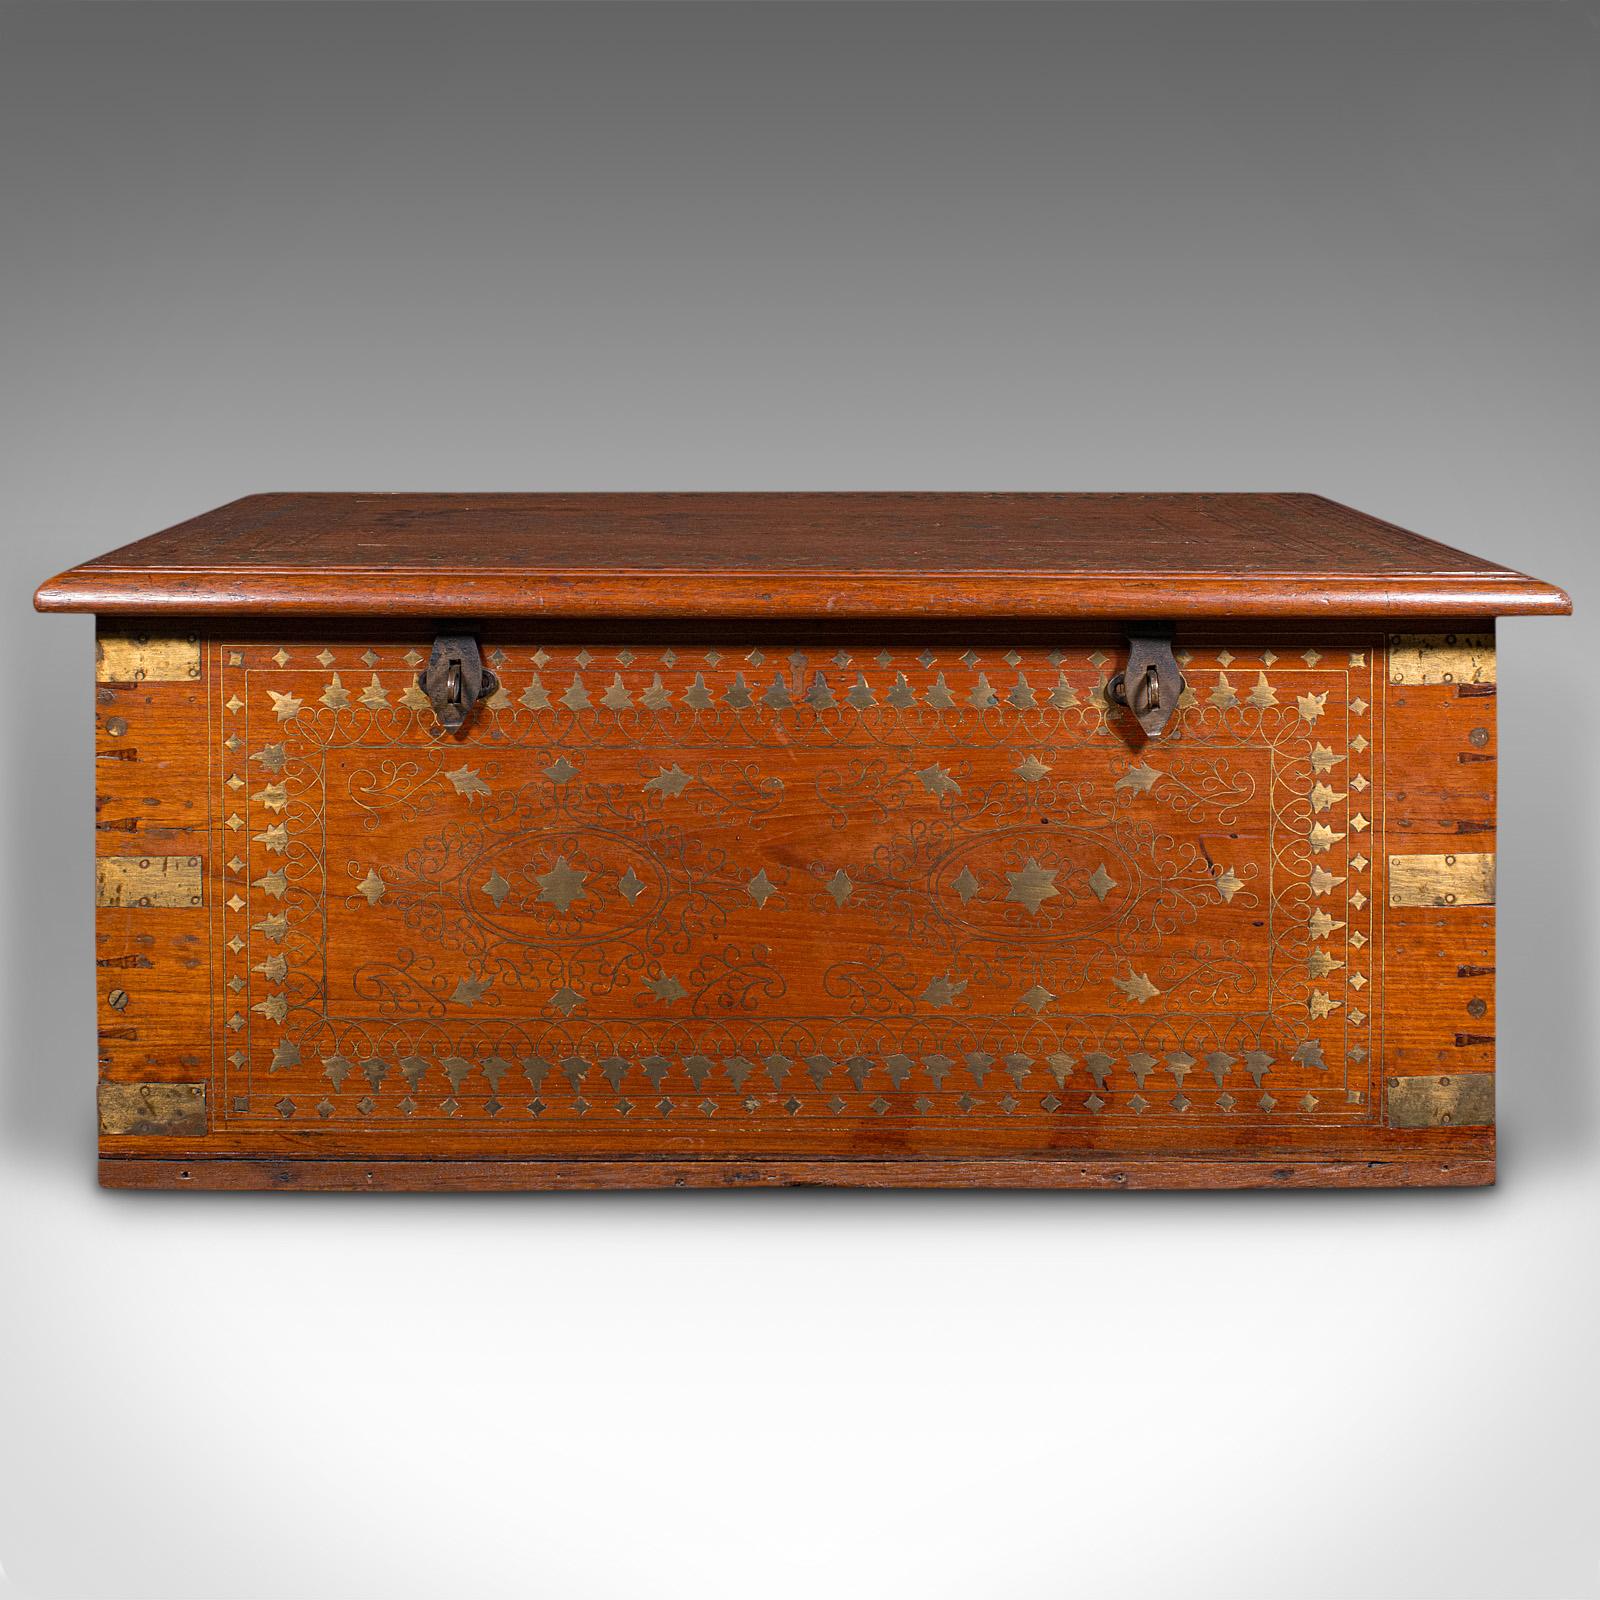 This is a vintage campaign chest. An Anglo-Indian, teak and brass inlaid decorative trunk, dating to the Art Deco period, circa 1940.

Appealing decorative finish and of useful proportion
Displays a desirable aged patina and in good order
Teak